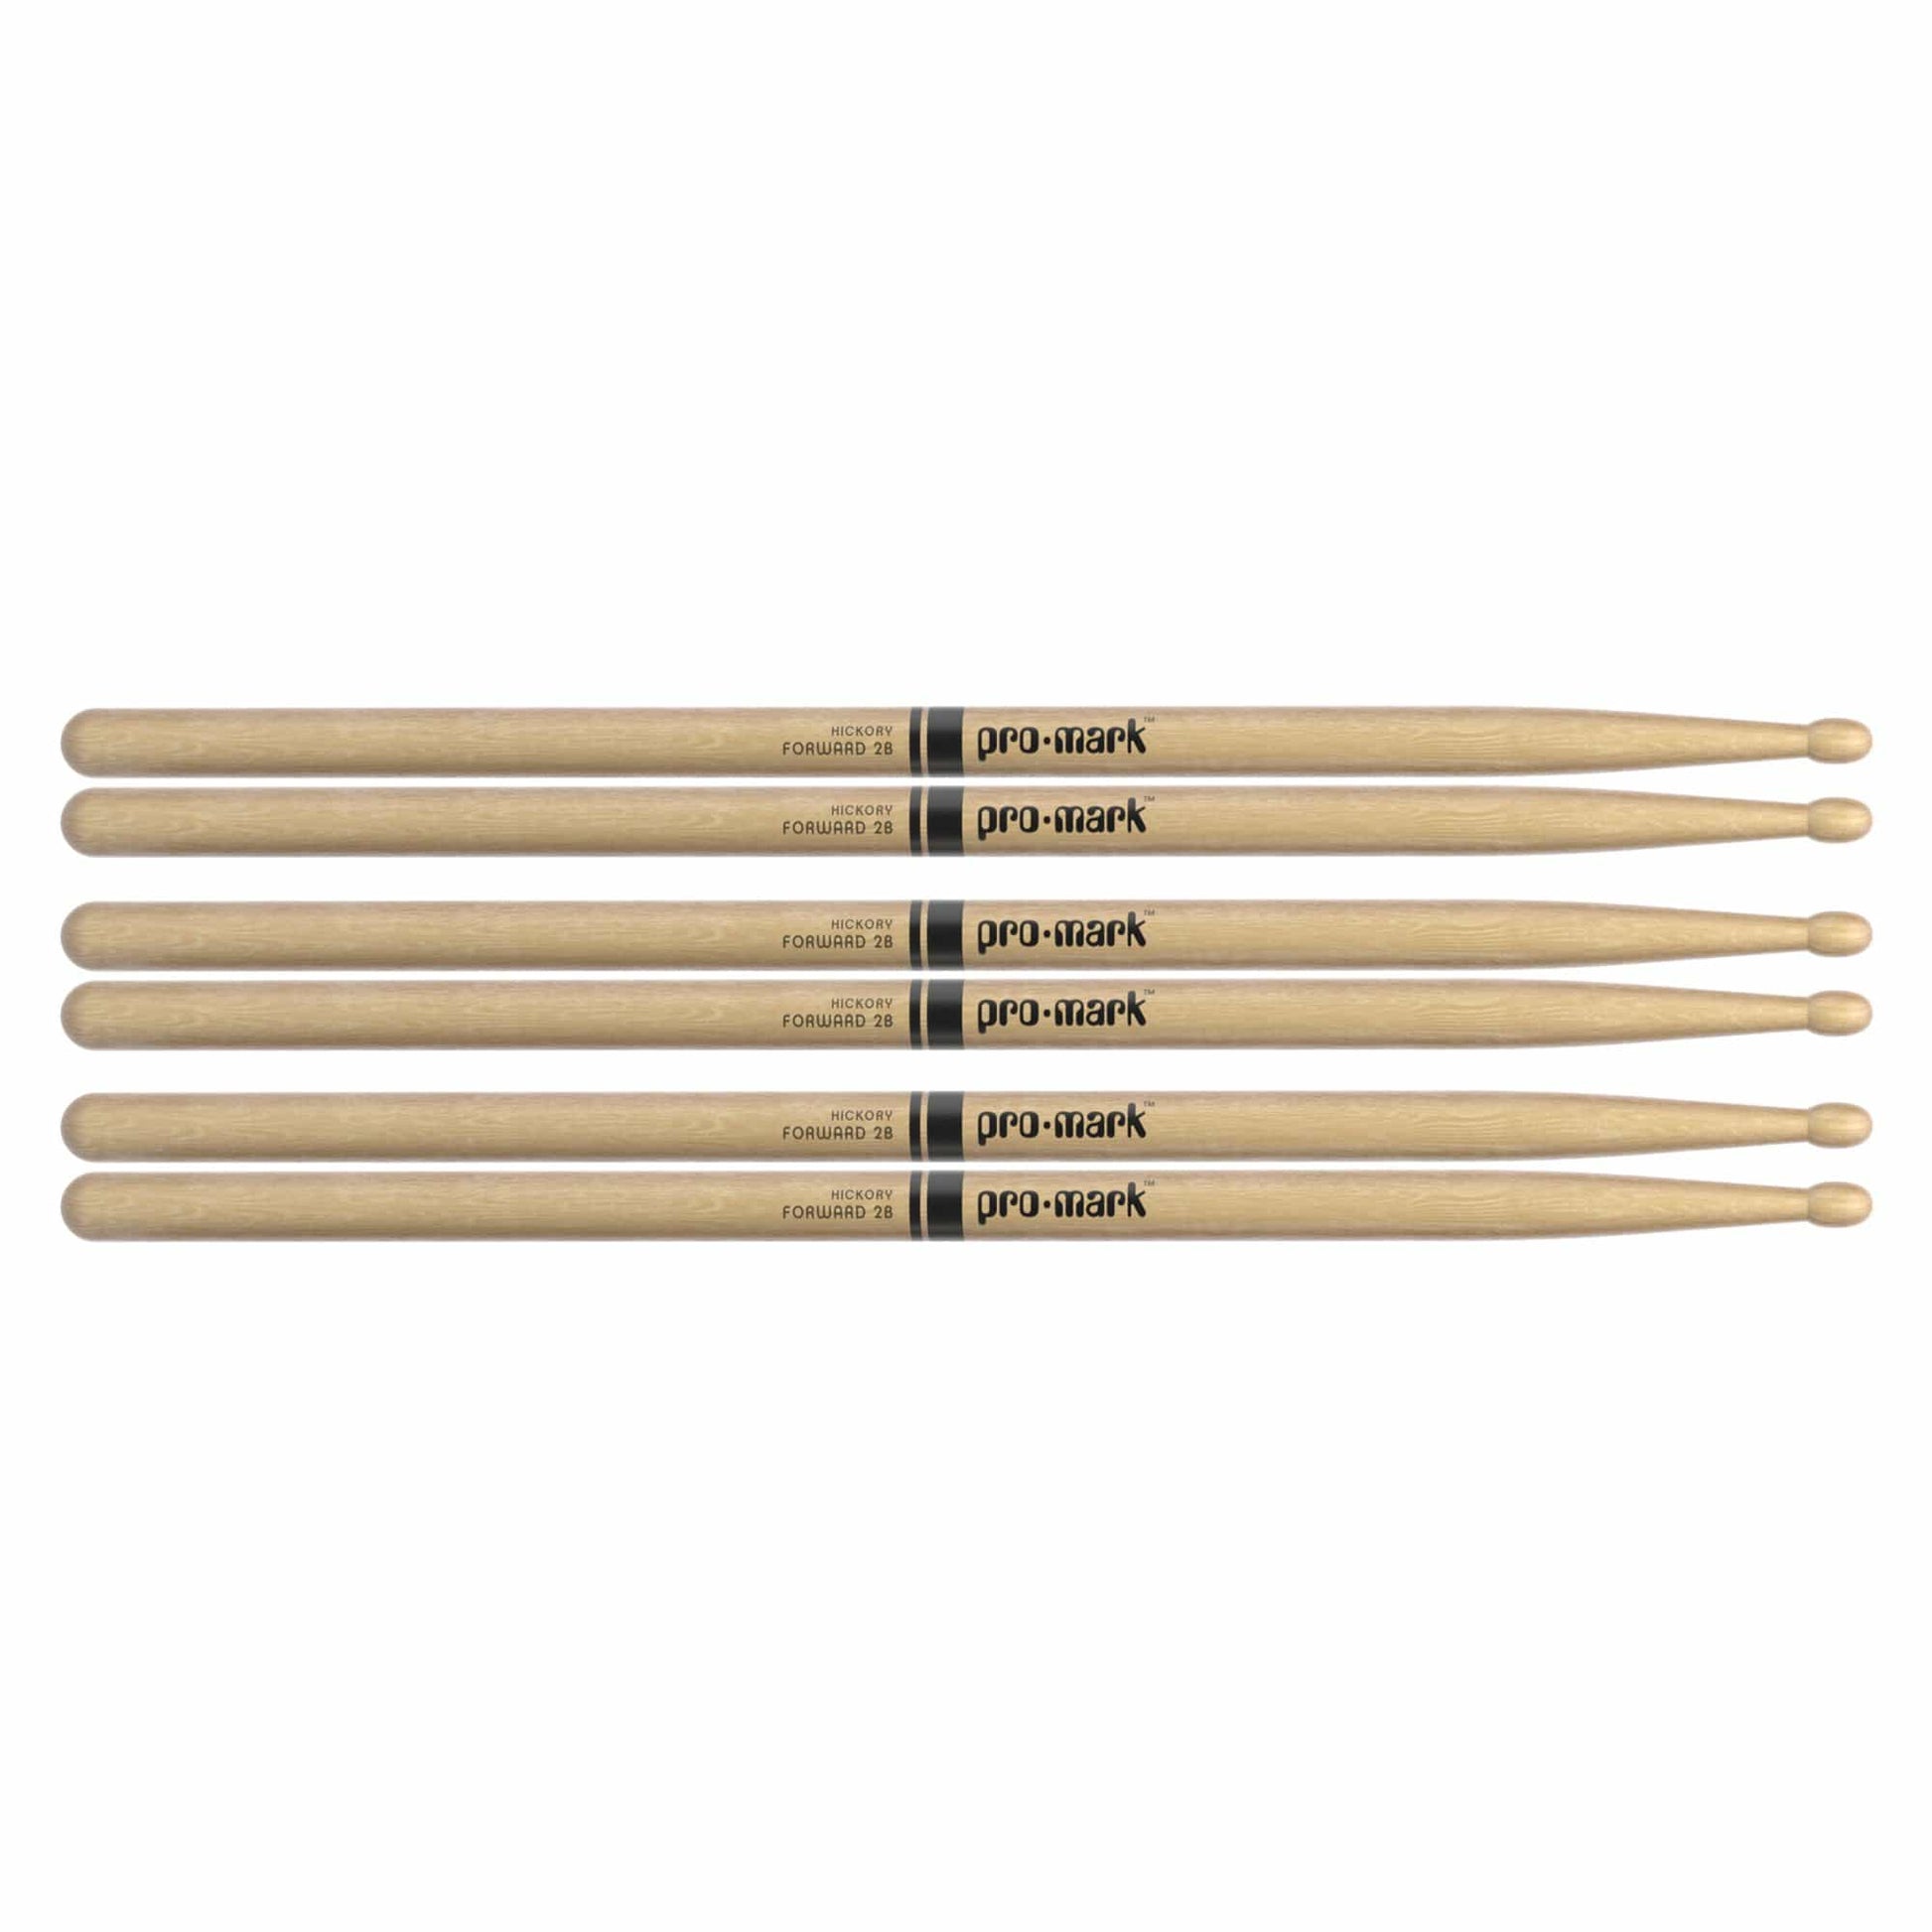 Promark American Hickory 2B Wood Tip Drum Sticks (3 Pair Bundle) Drums and Percussion / Parts and Accessories / Drum Sticks and Mallets